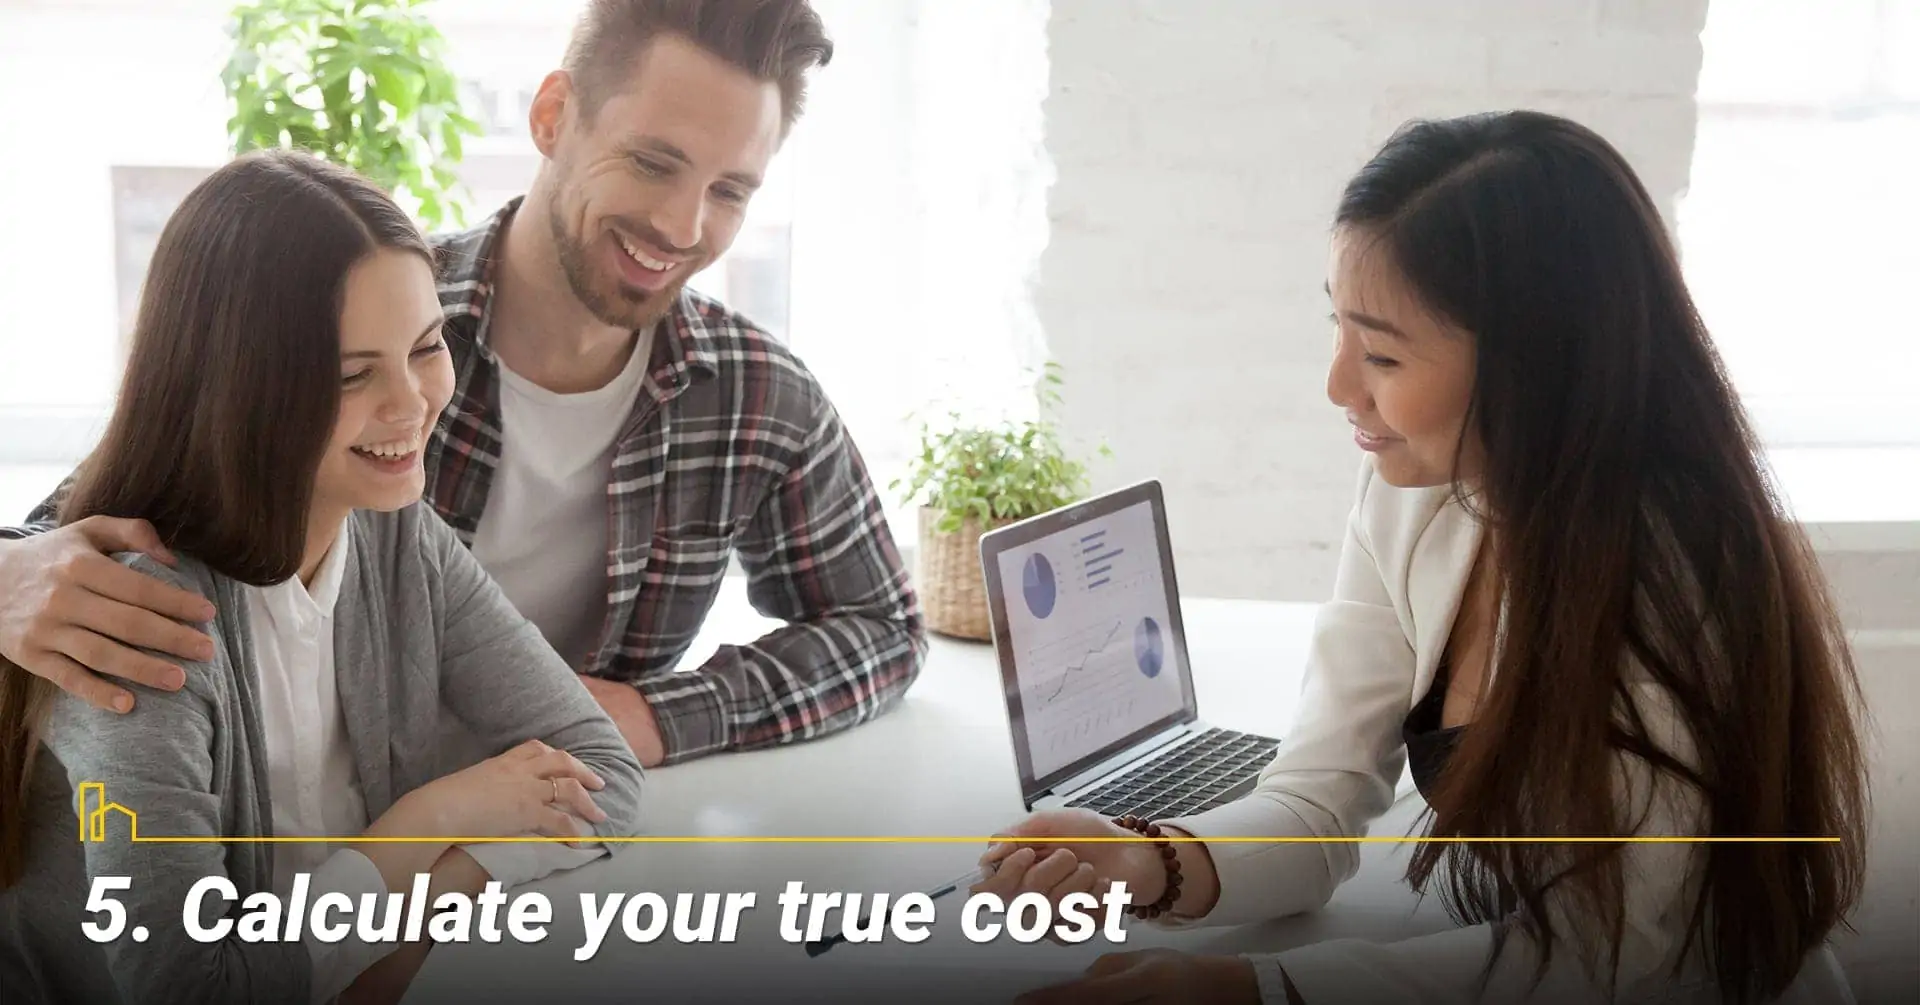 Calculate your true cost, true cost of buying a home